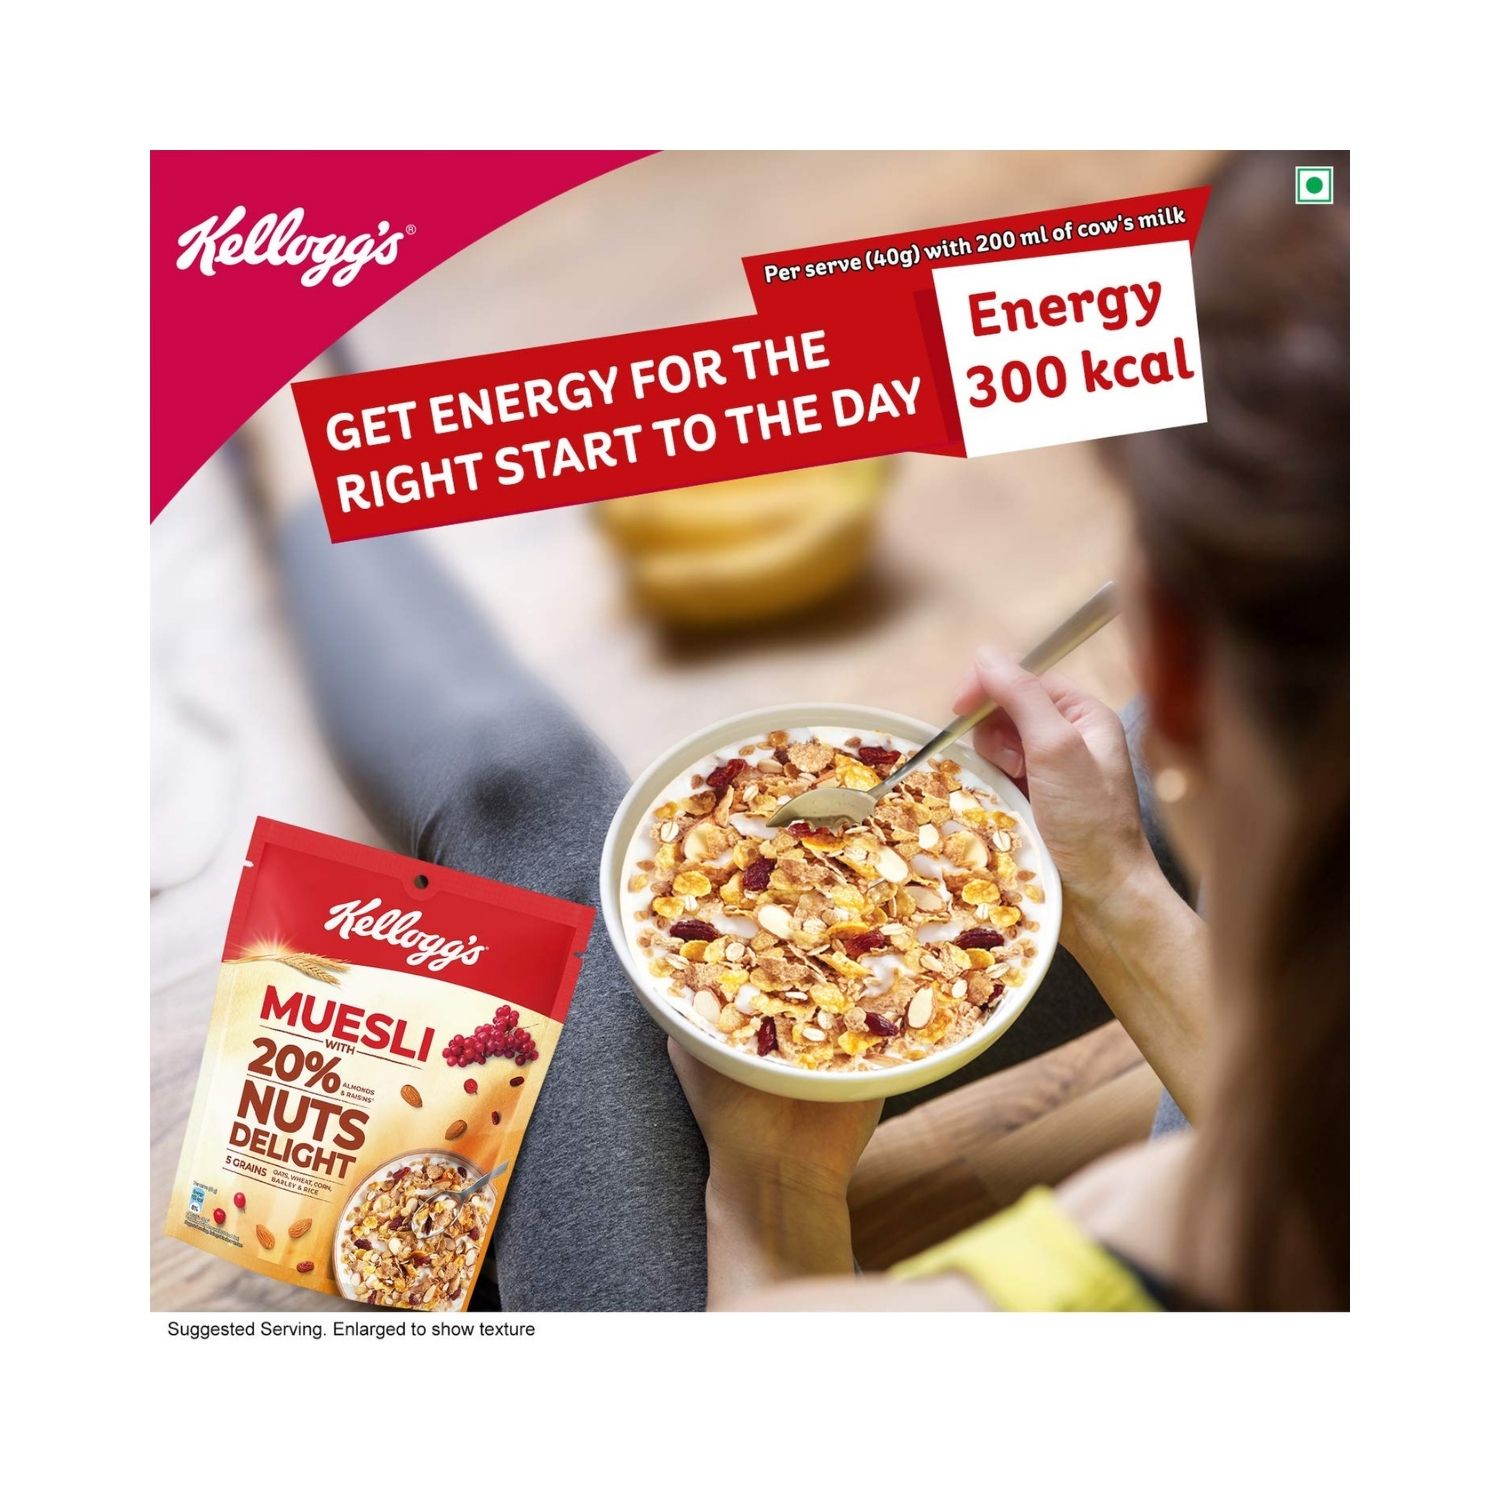 Kellogg's Muesli with 20% Nuts Delight, 750g (free shipping world)